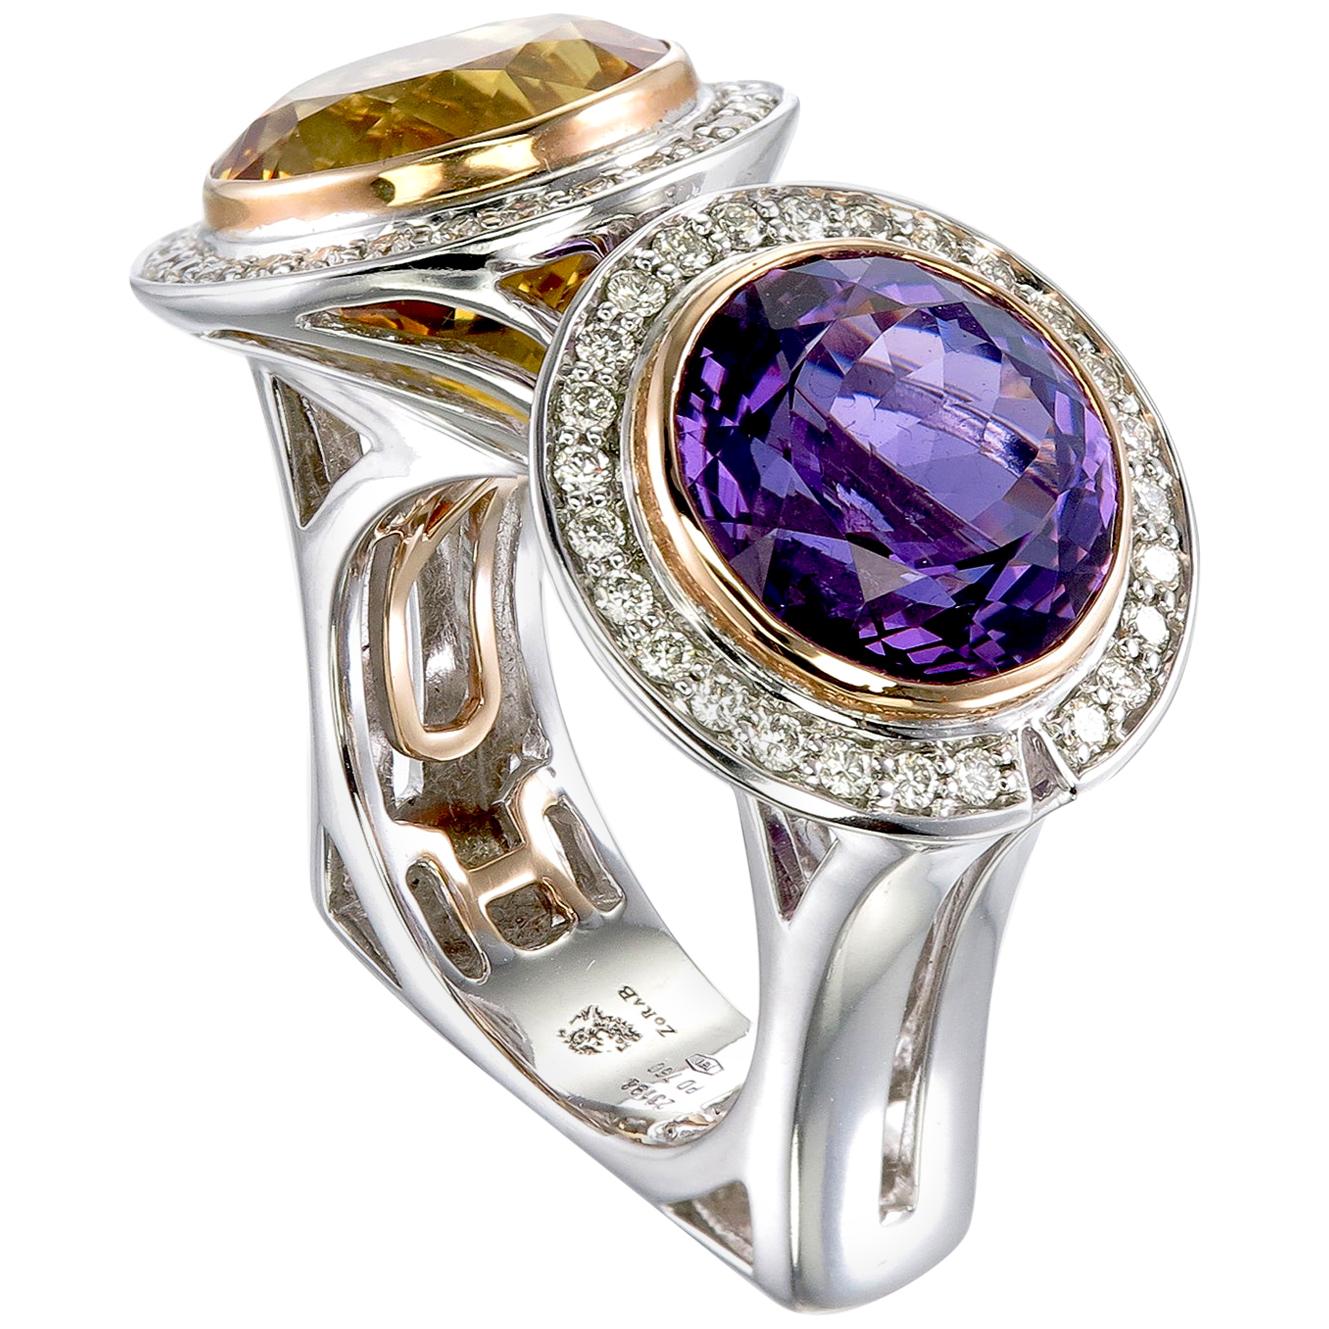 Zorab Creation Amethyst and Citrine Couple Mignone Ring For Sale